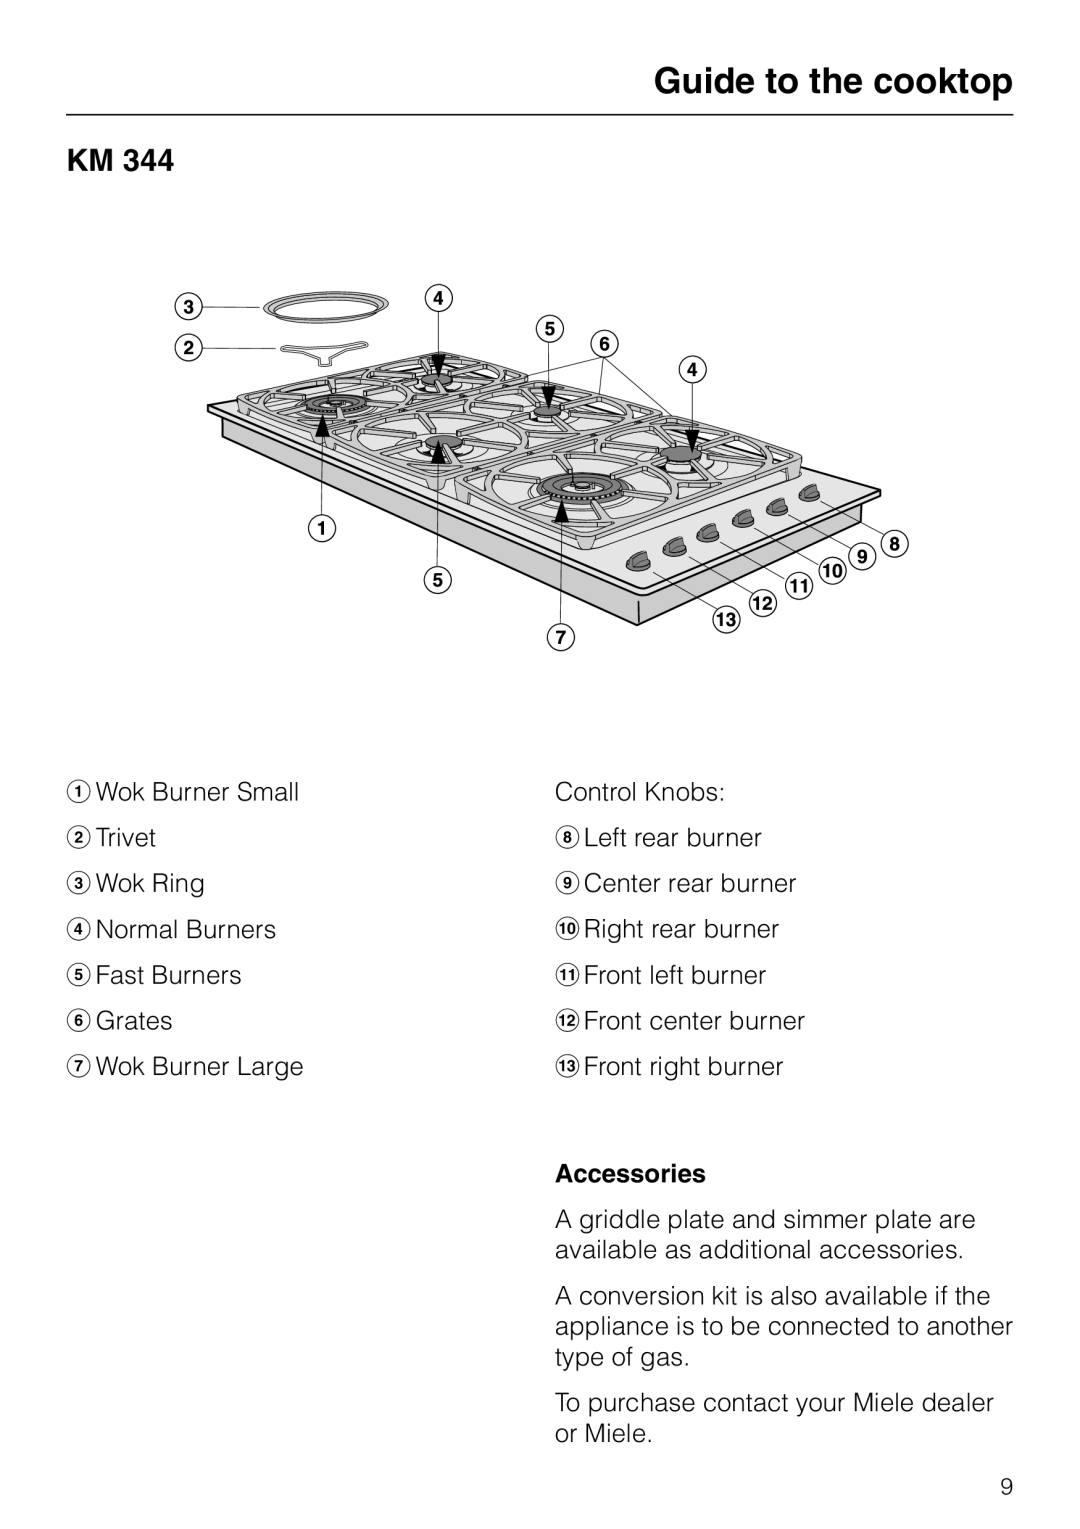 Miele KM 342, KM 344 manual Guide to the cooktop, Accessories 